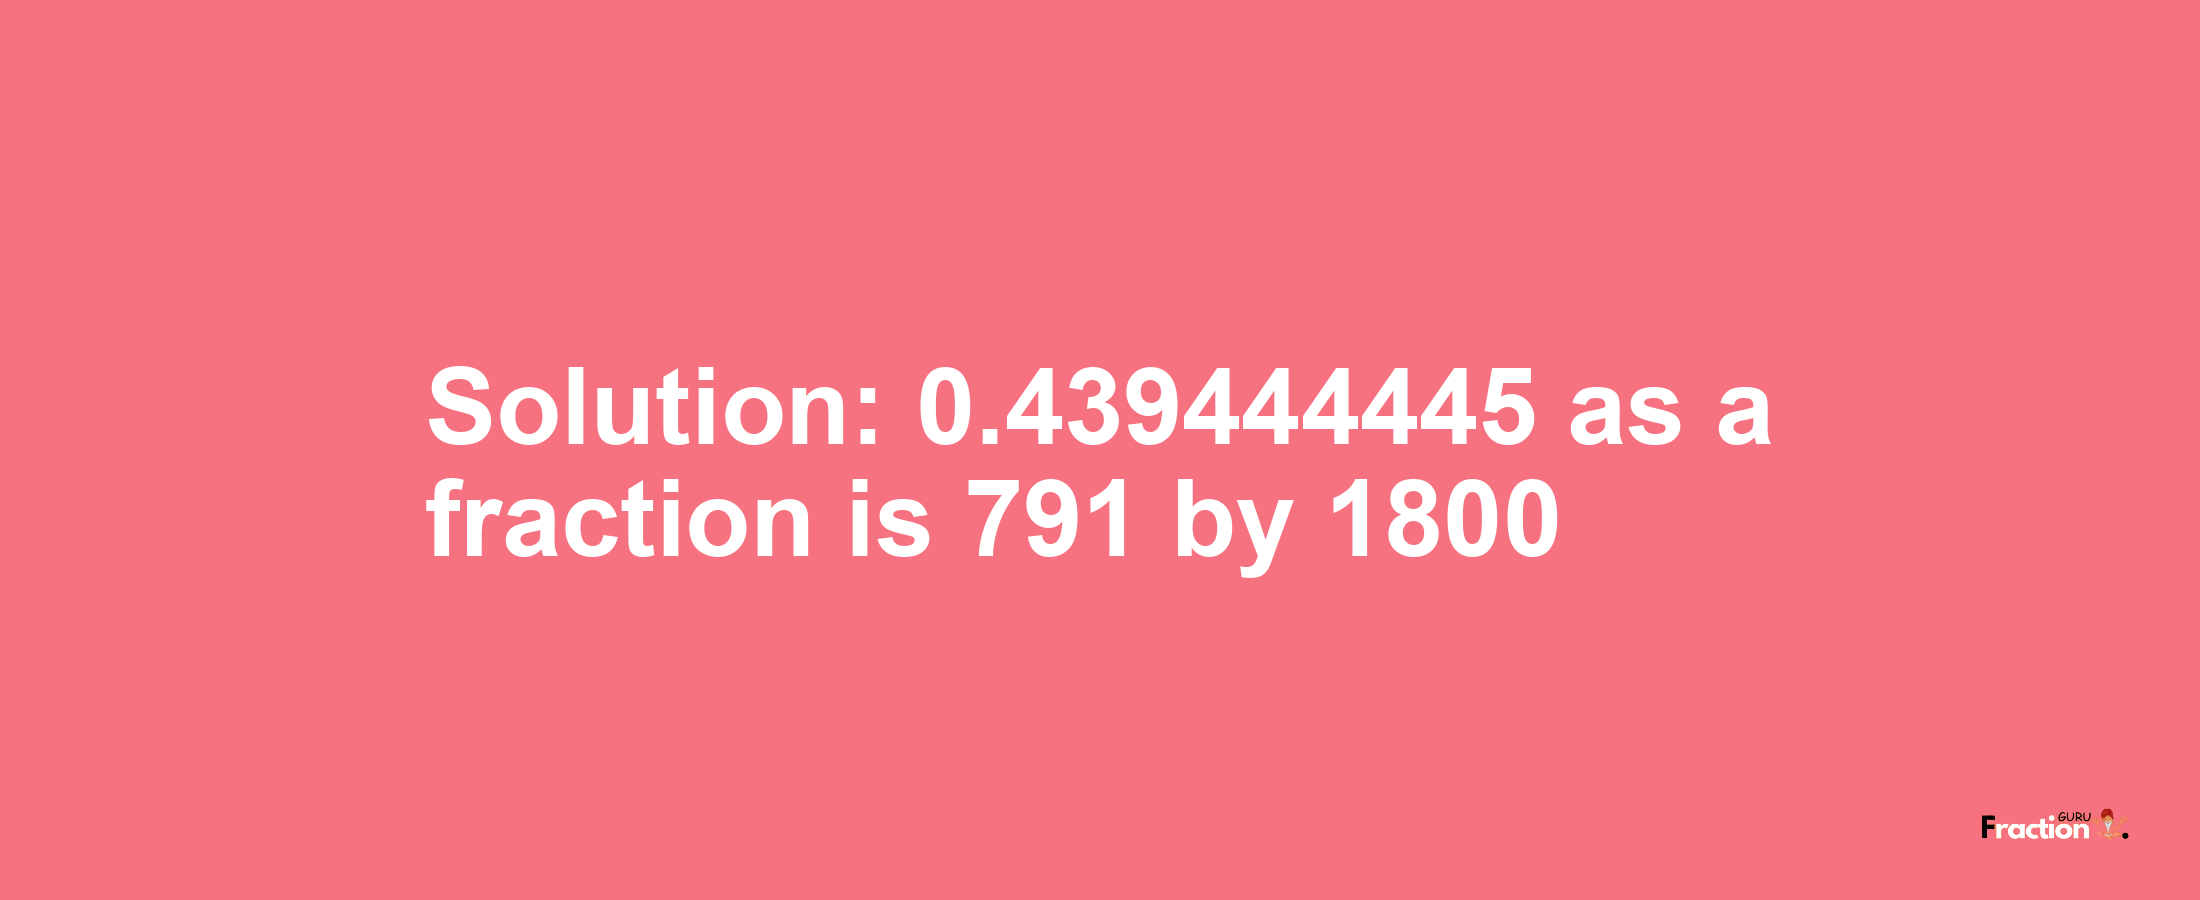 Solution:0.439444445 as a fraction is 791/1800